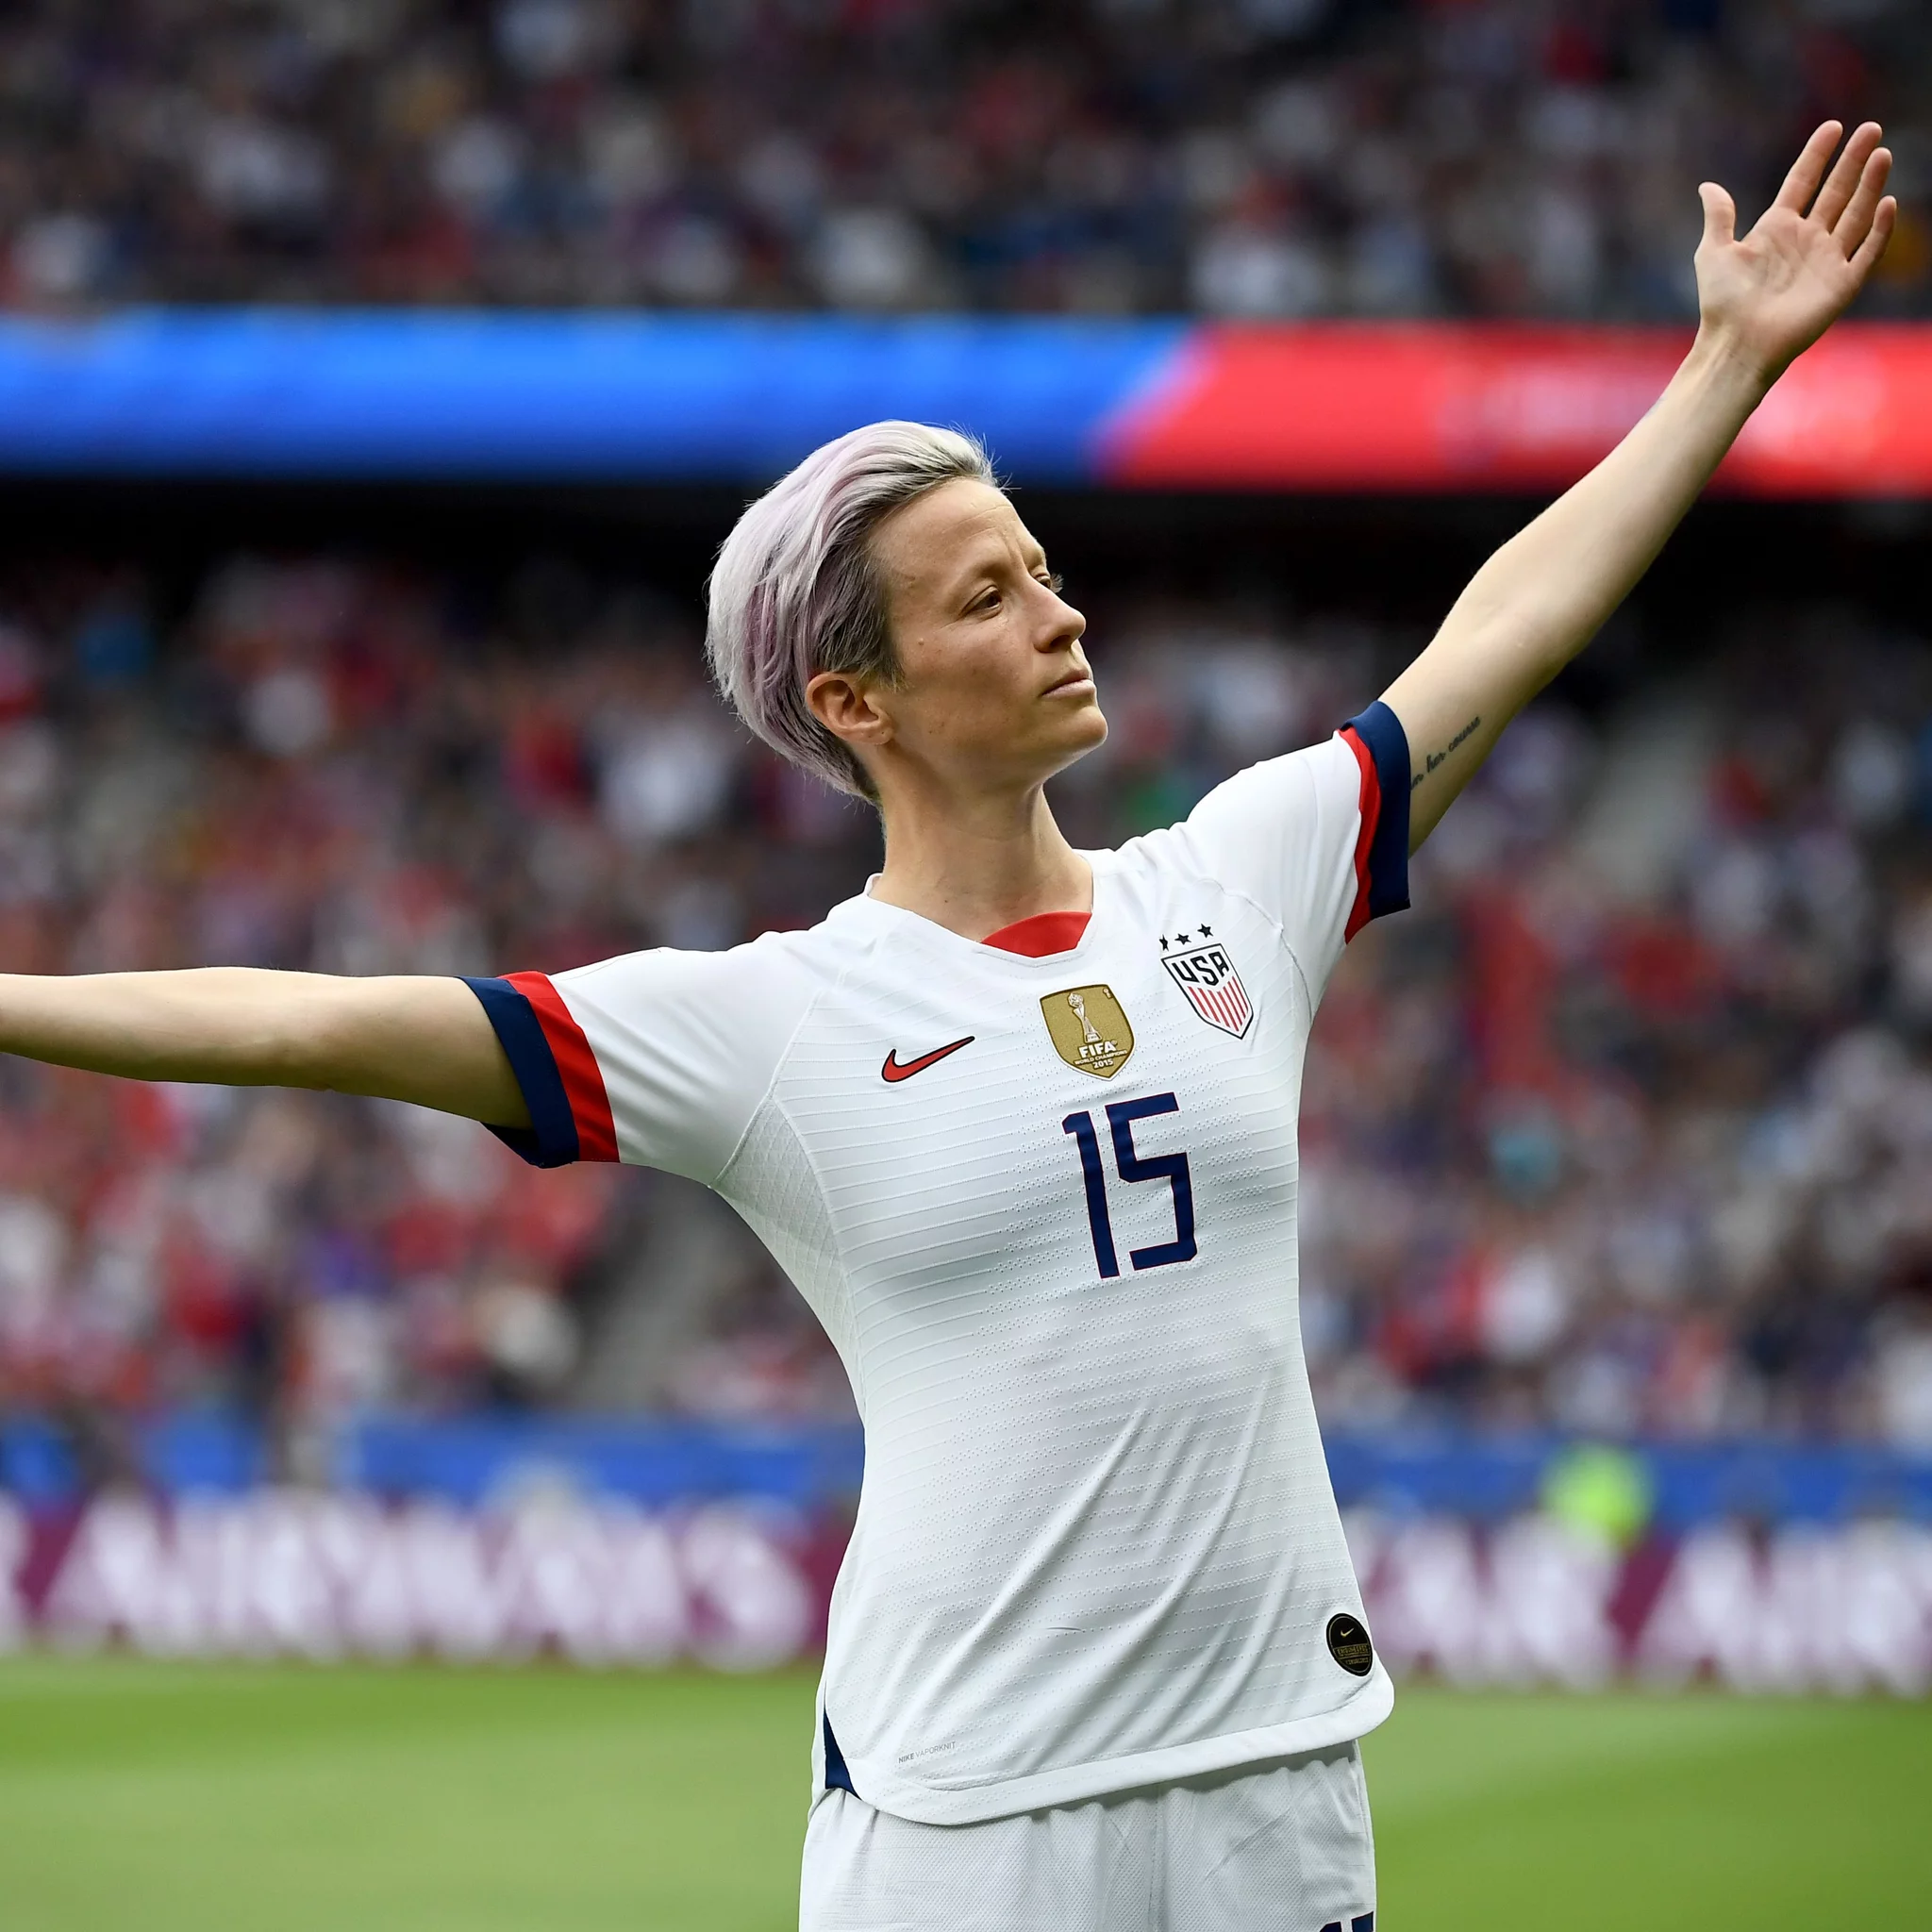 What position did Megan Rapinoe play in the 2012 London Olympics?